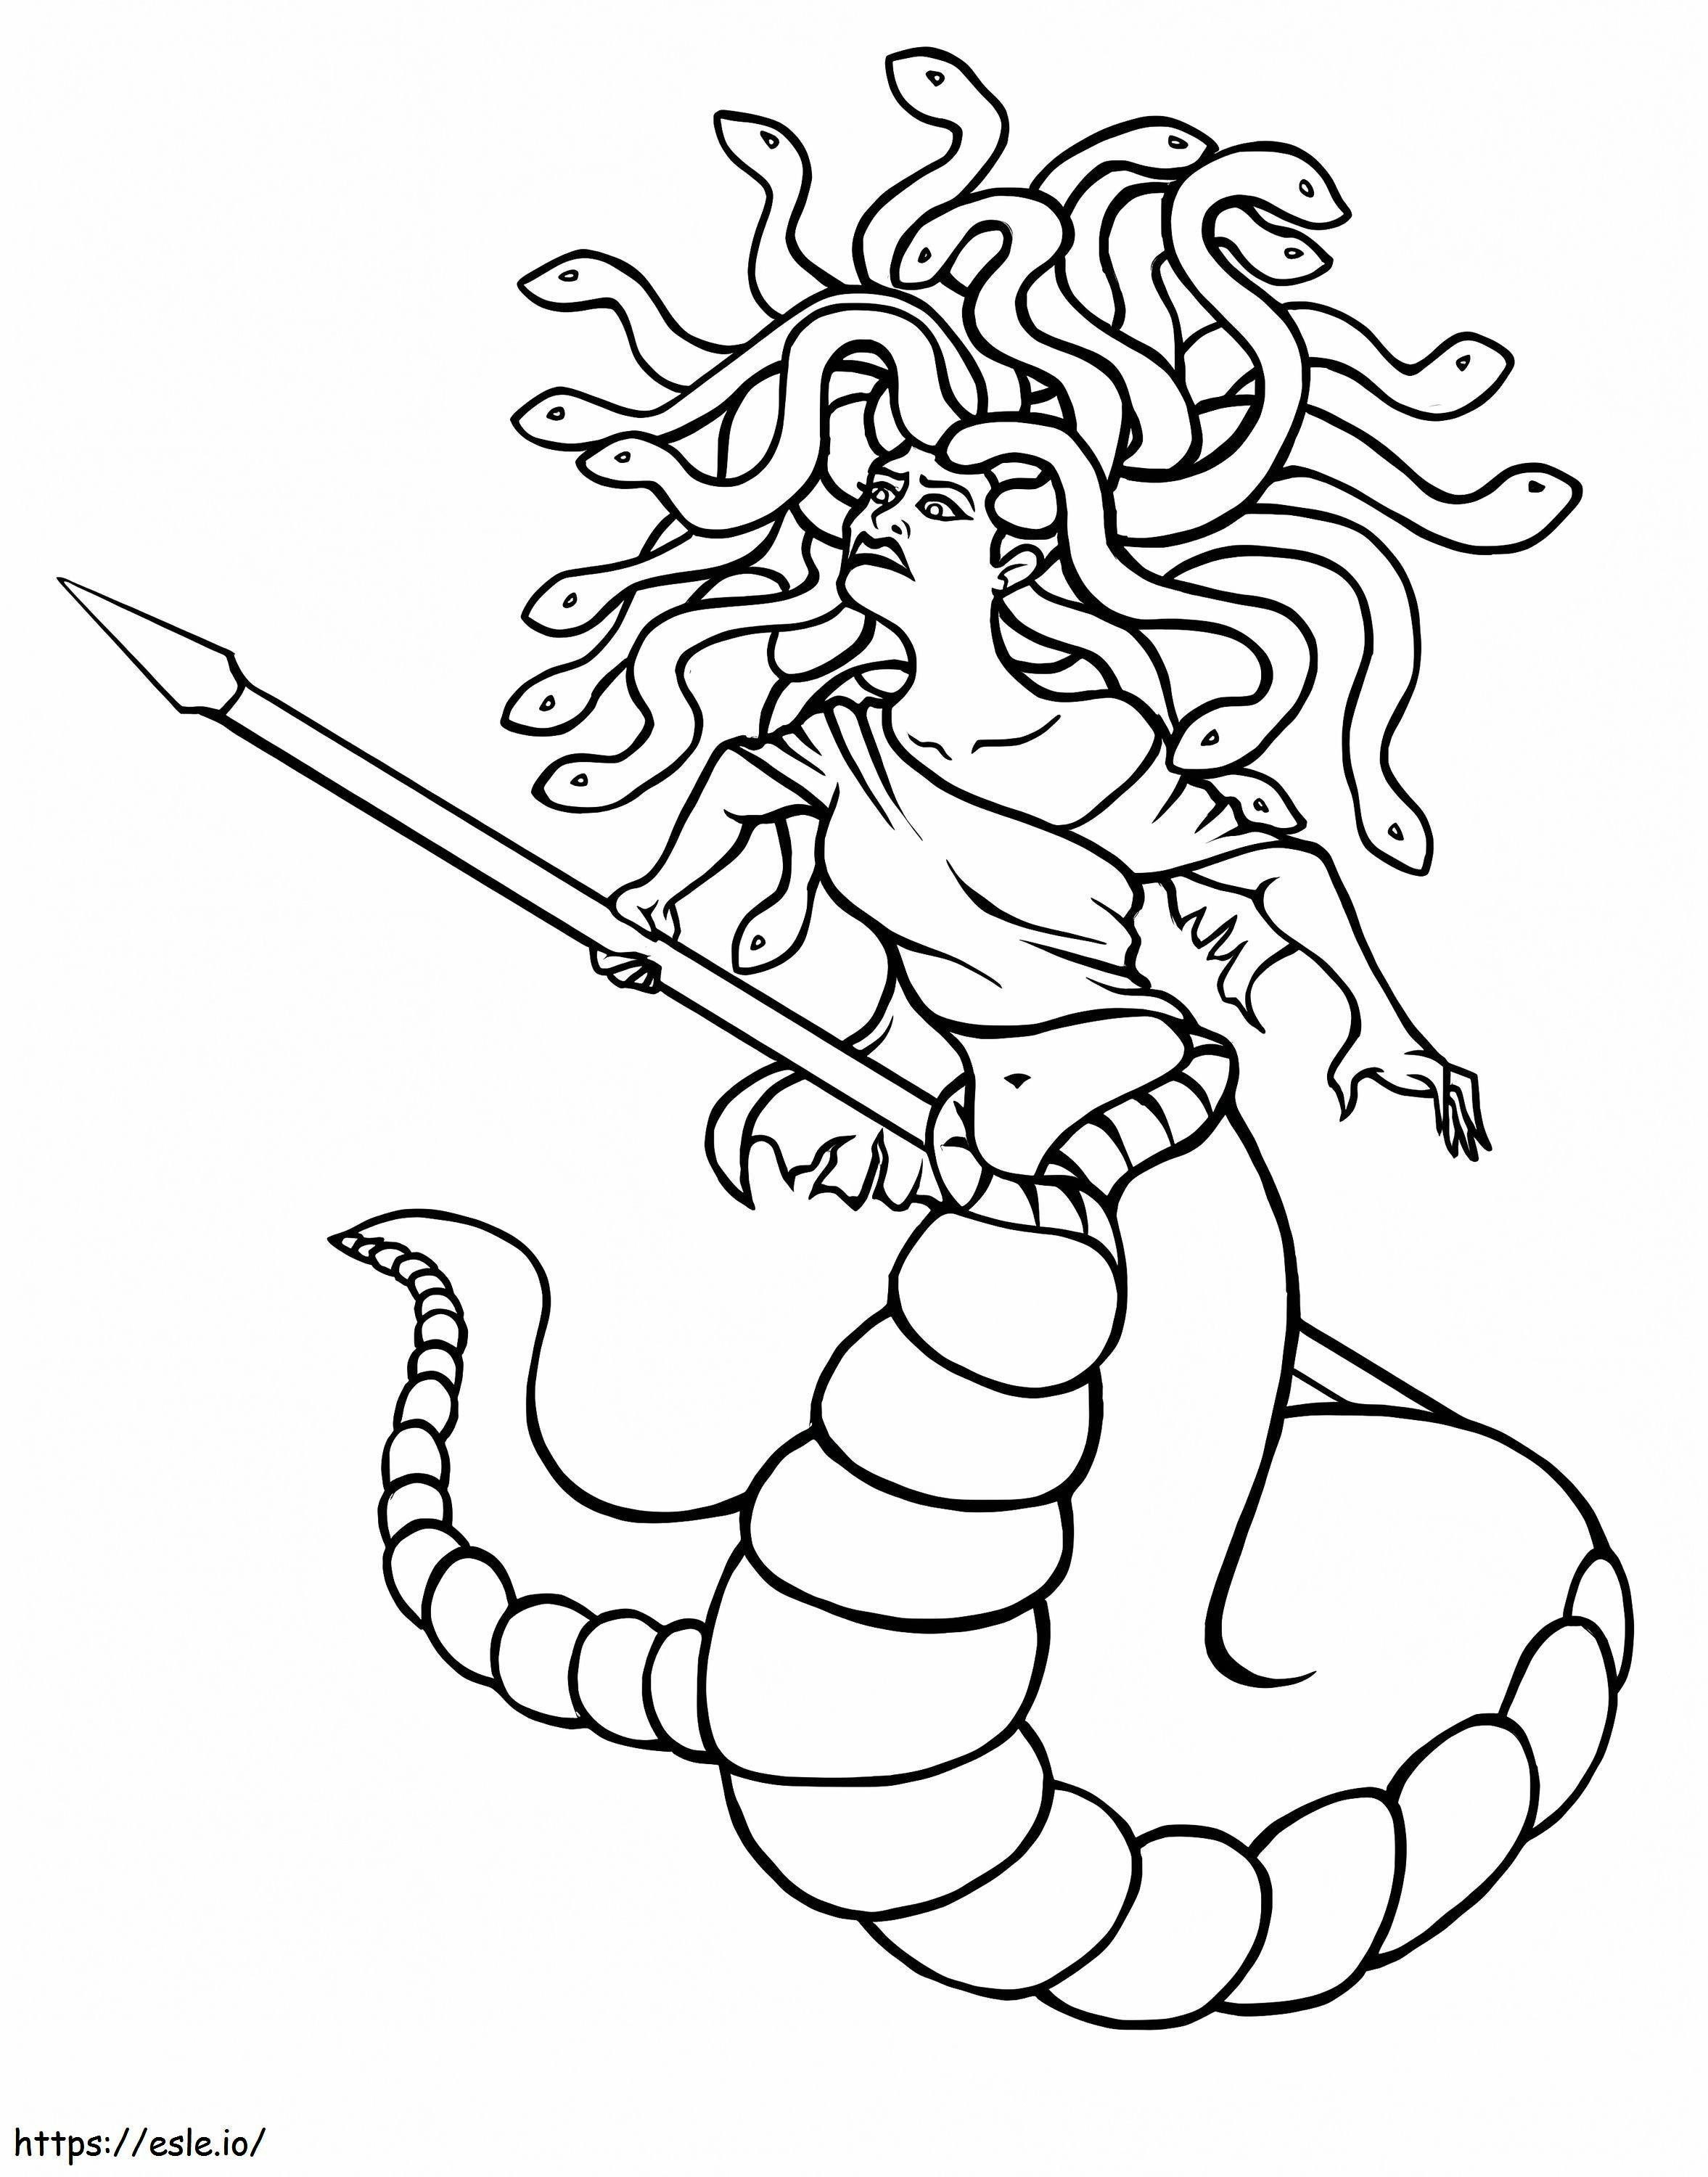 Angry Jellyfish coloring page